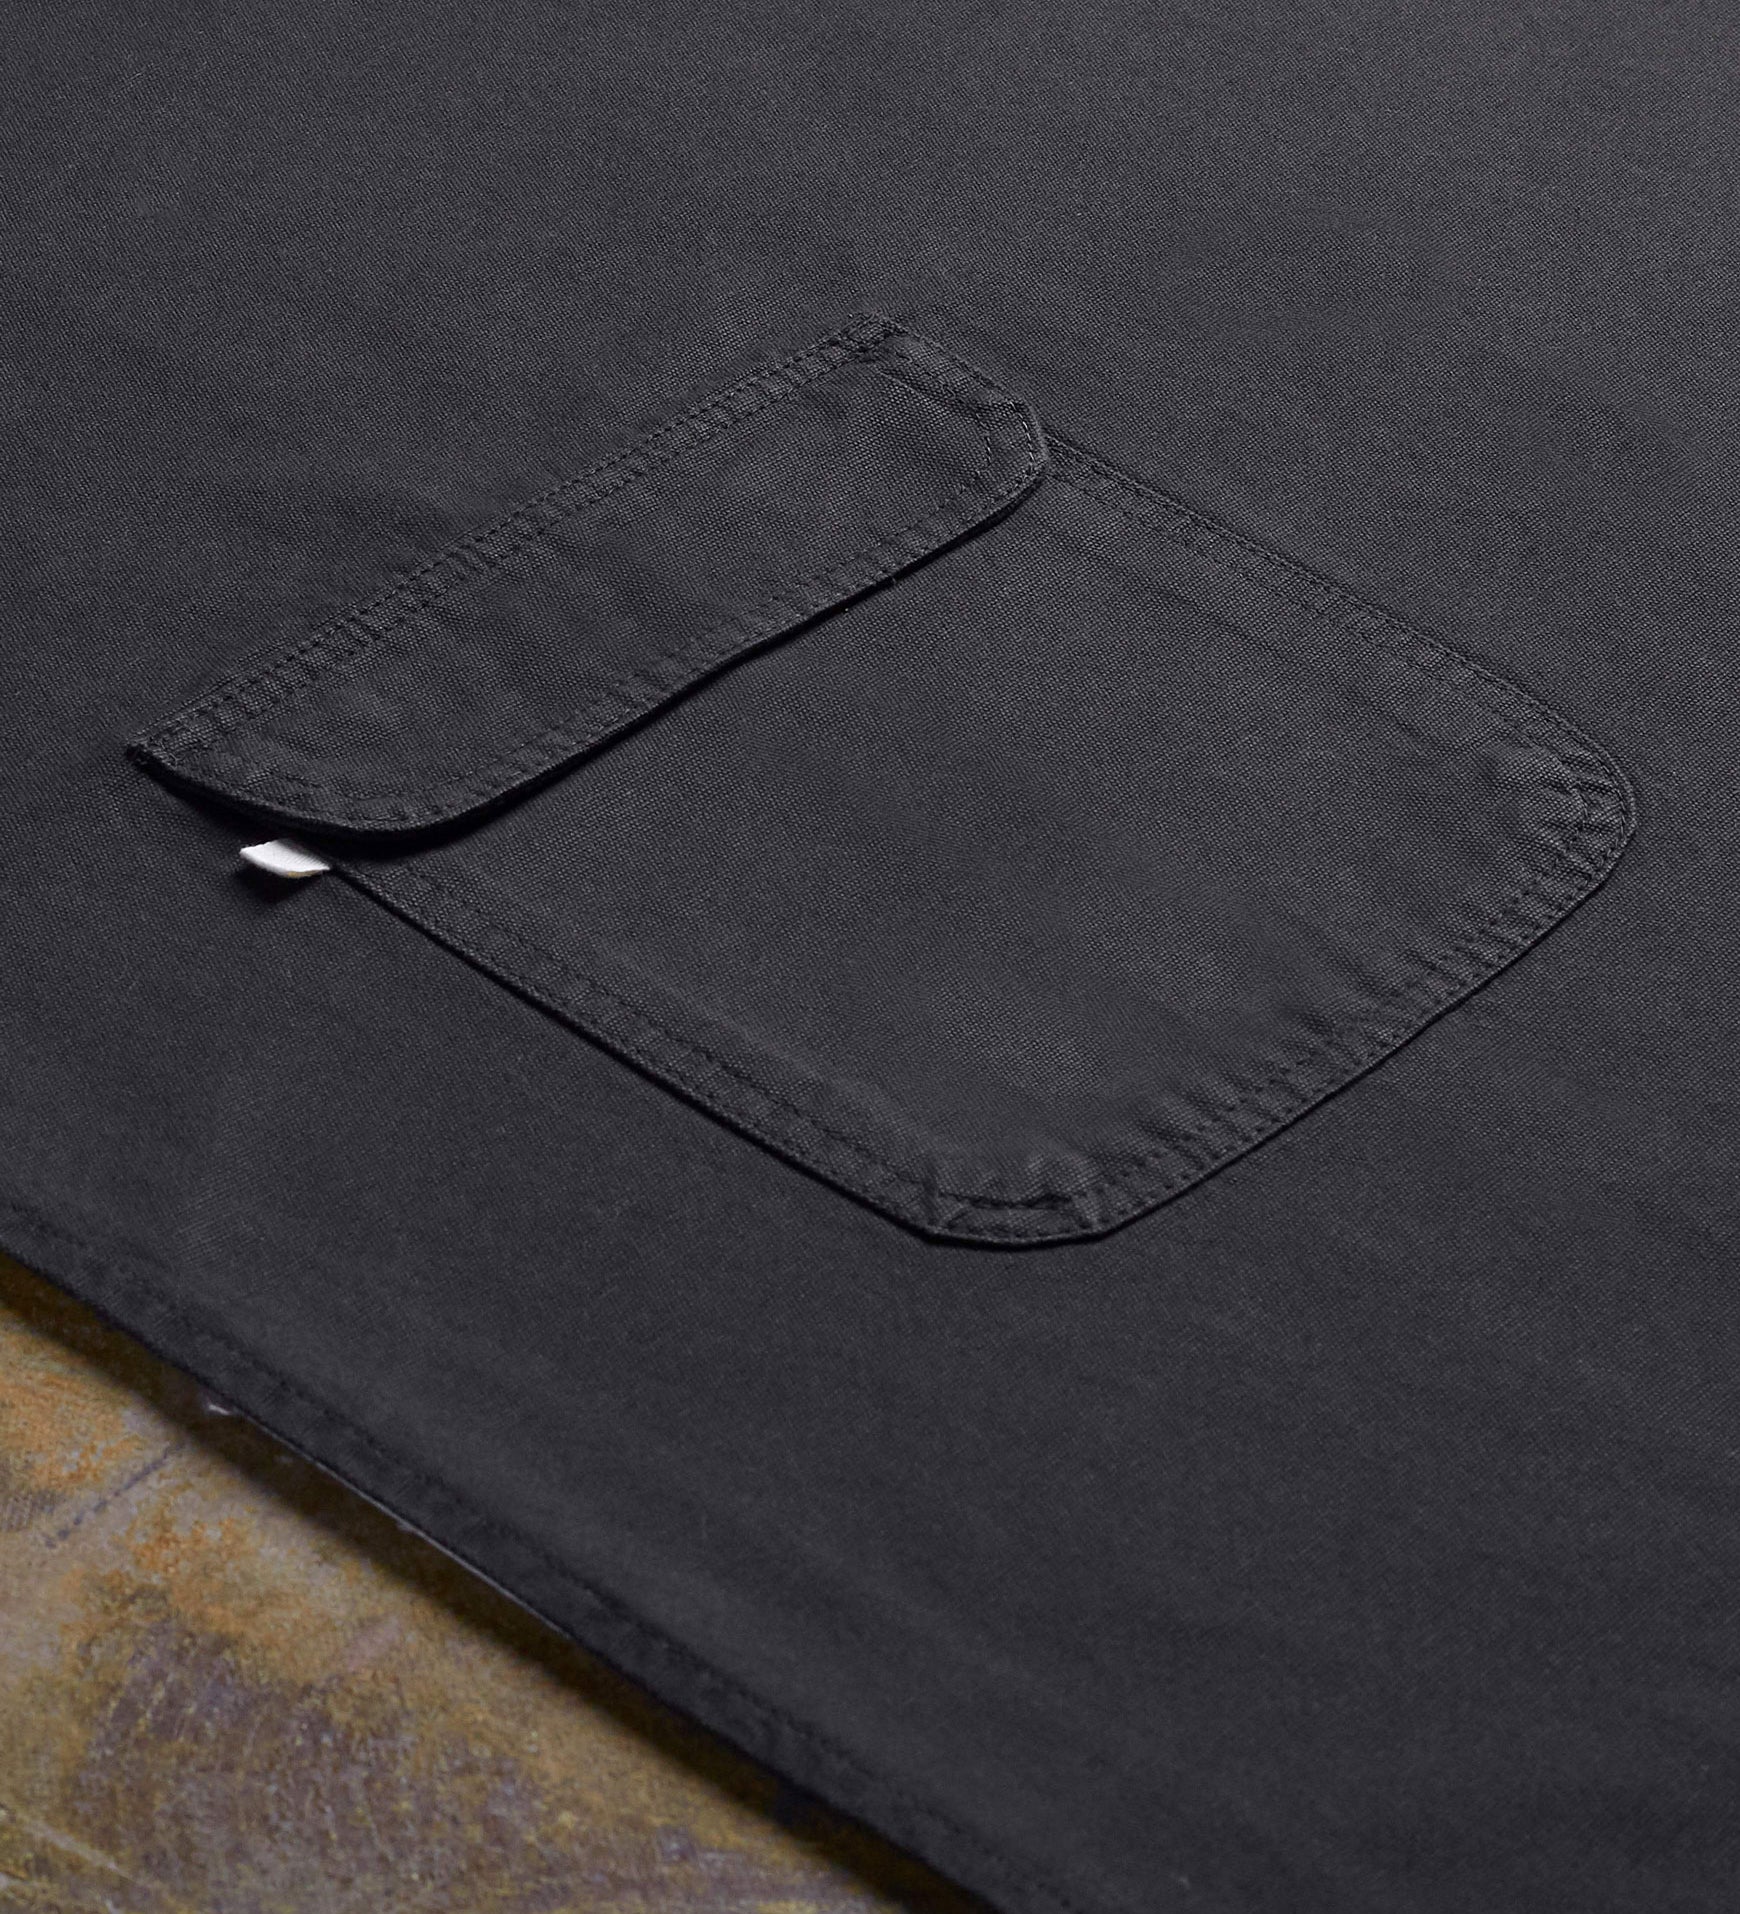 Angled flat view of faded black #9001 work apron by Uskees. Showing hip pocket and clearer view of organic cotton fabric texture.